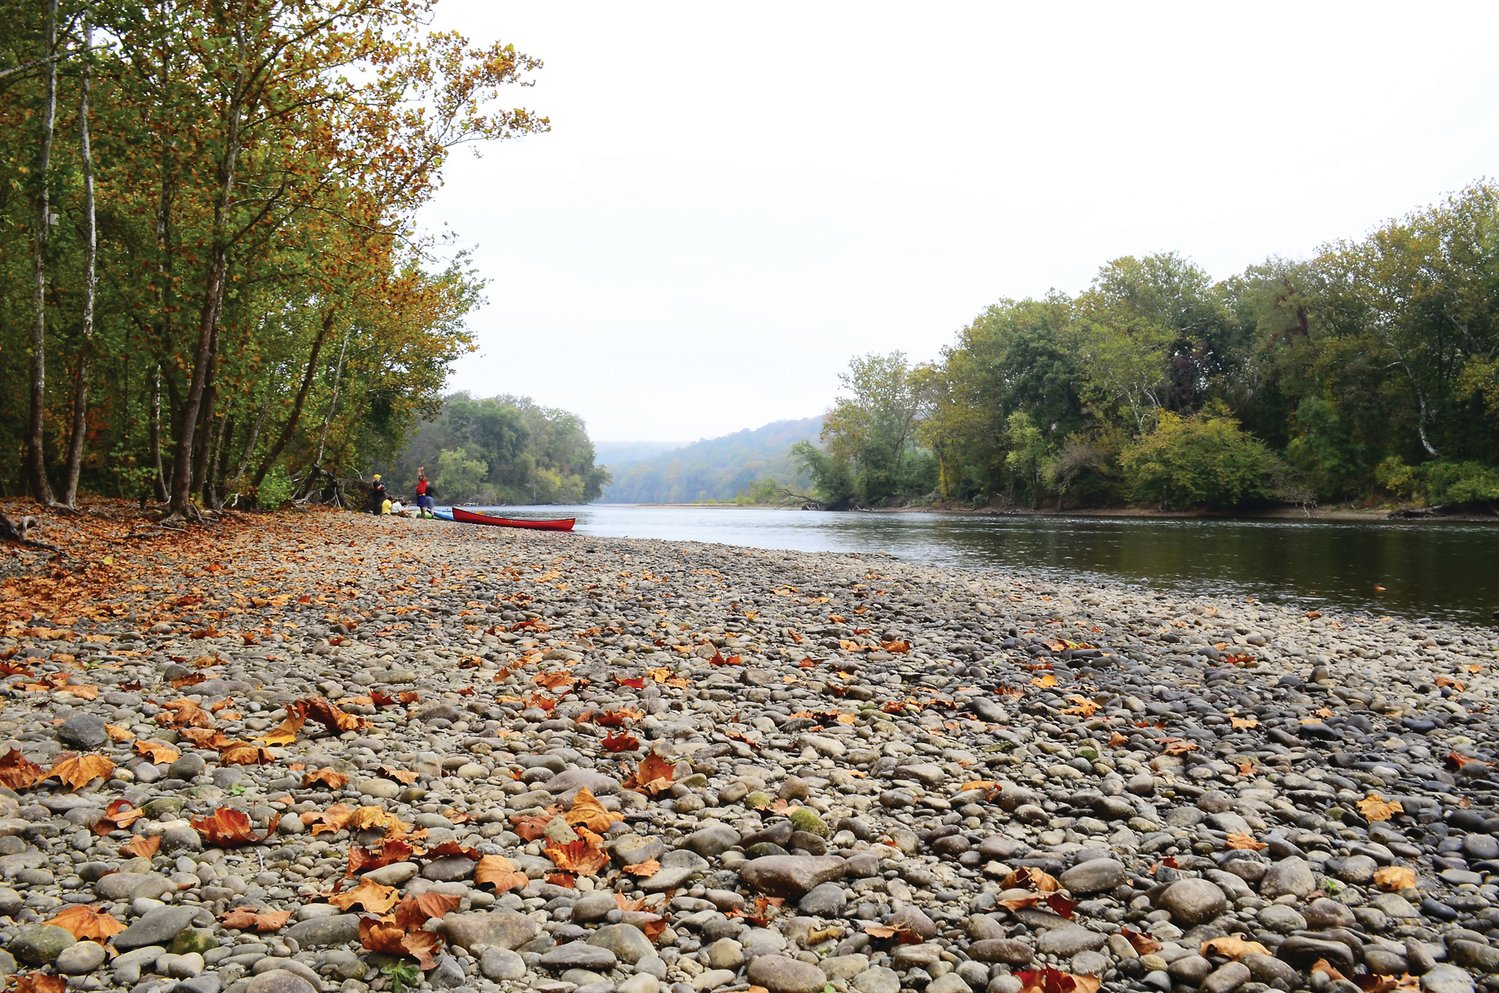 Outdoor enthusiasts enjoy the Delaware River.